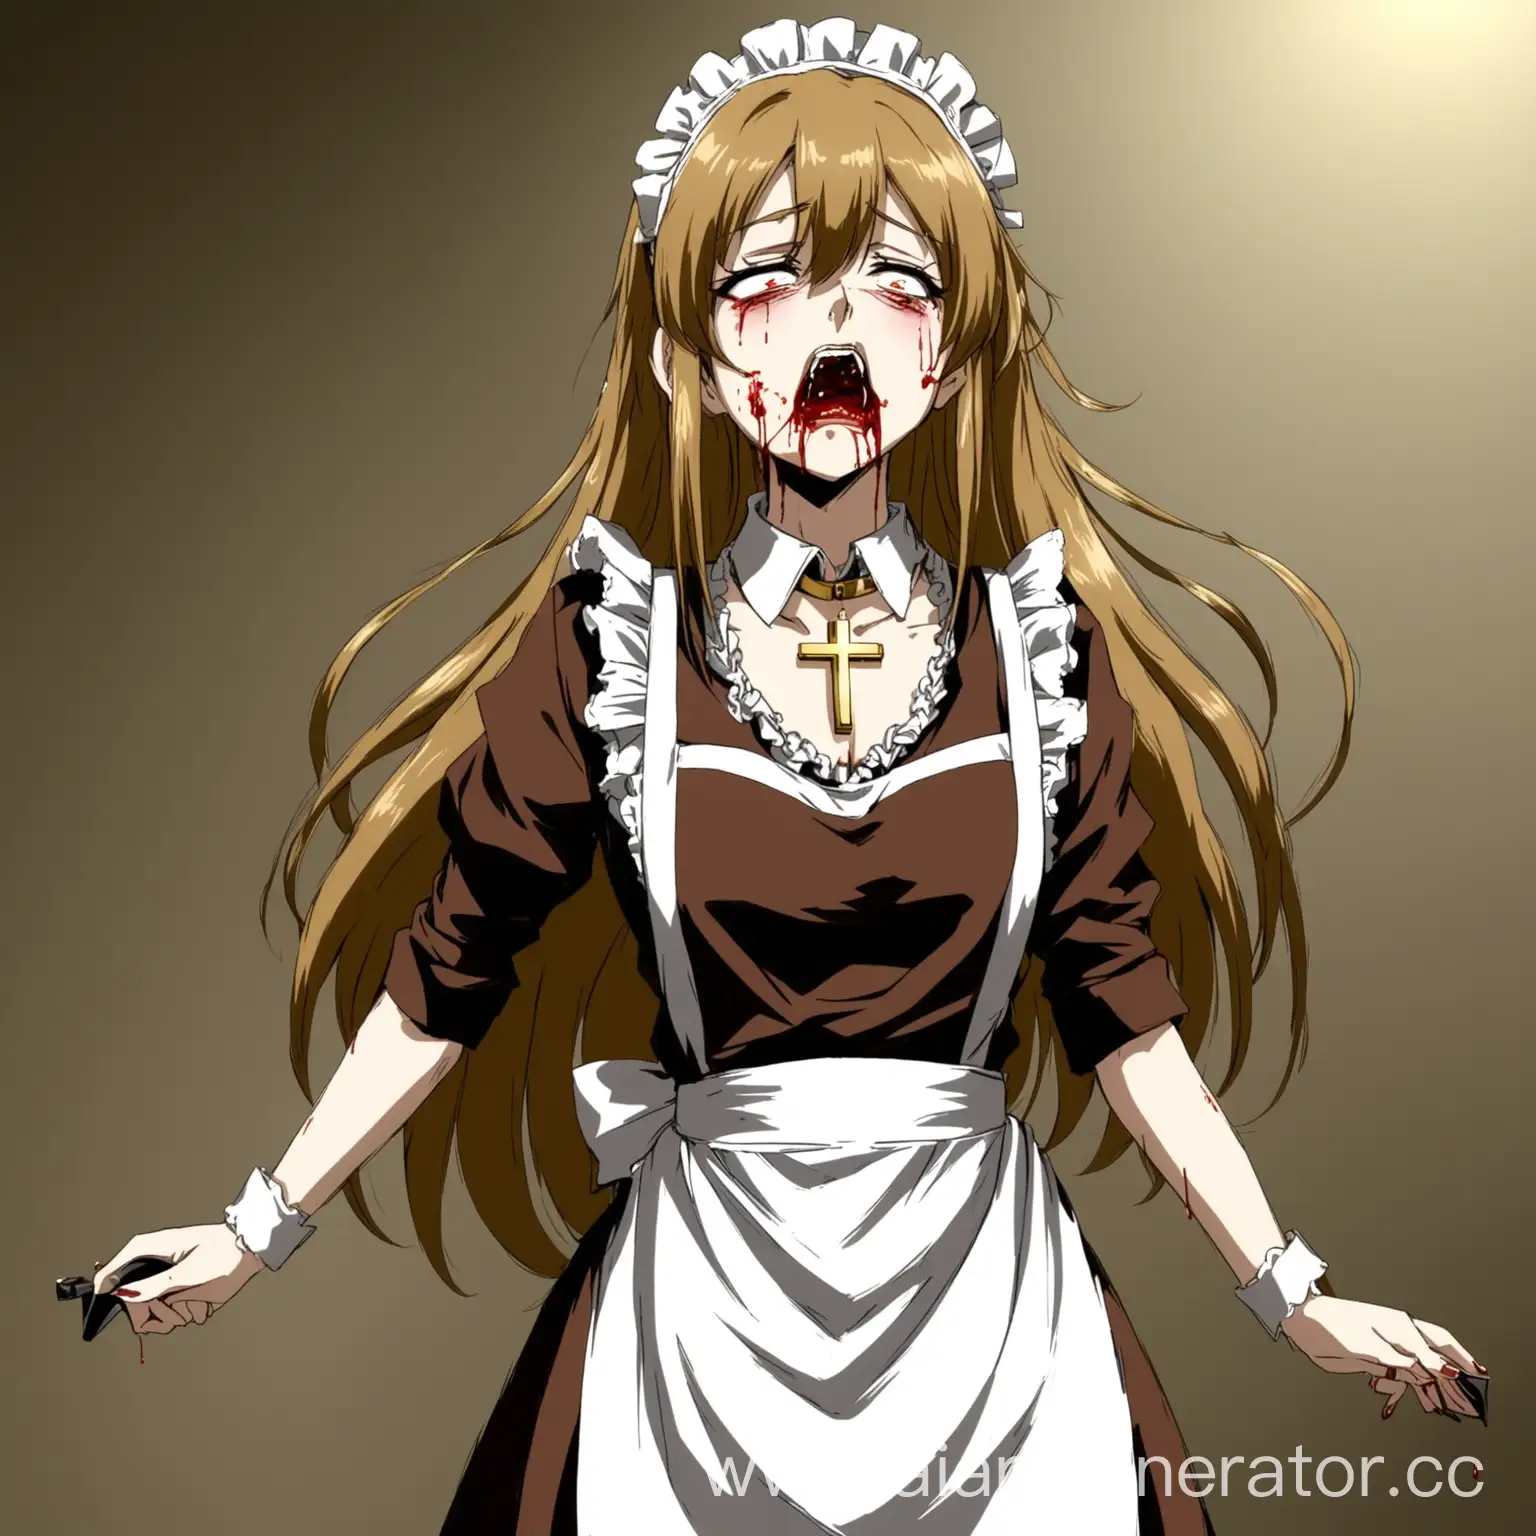 Maid-with-Gold-Cross-Necklace-Anime-Style-Character-with-Nosebleed